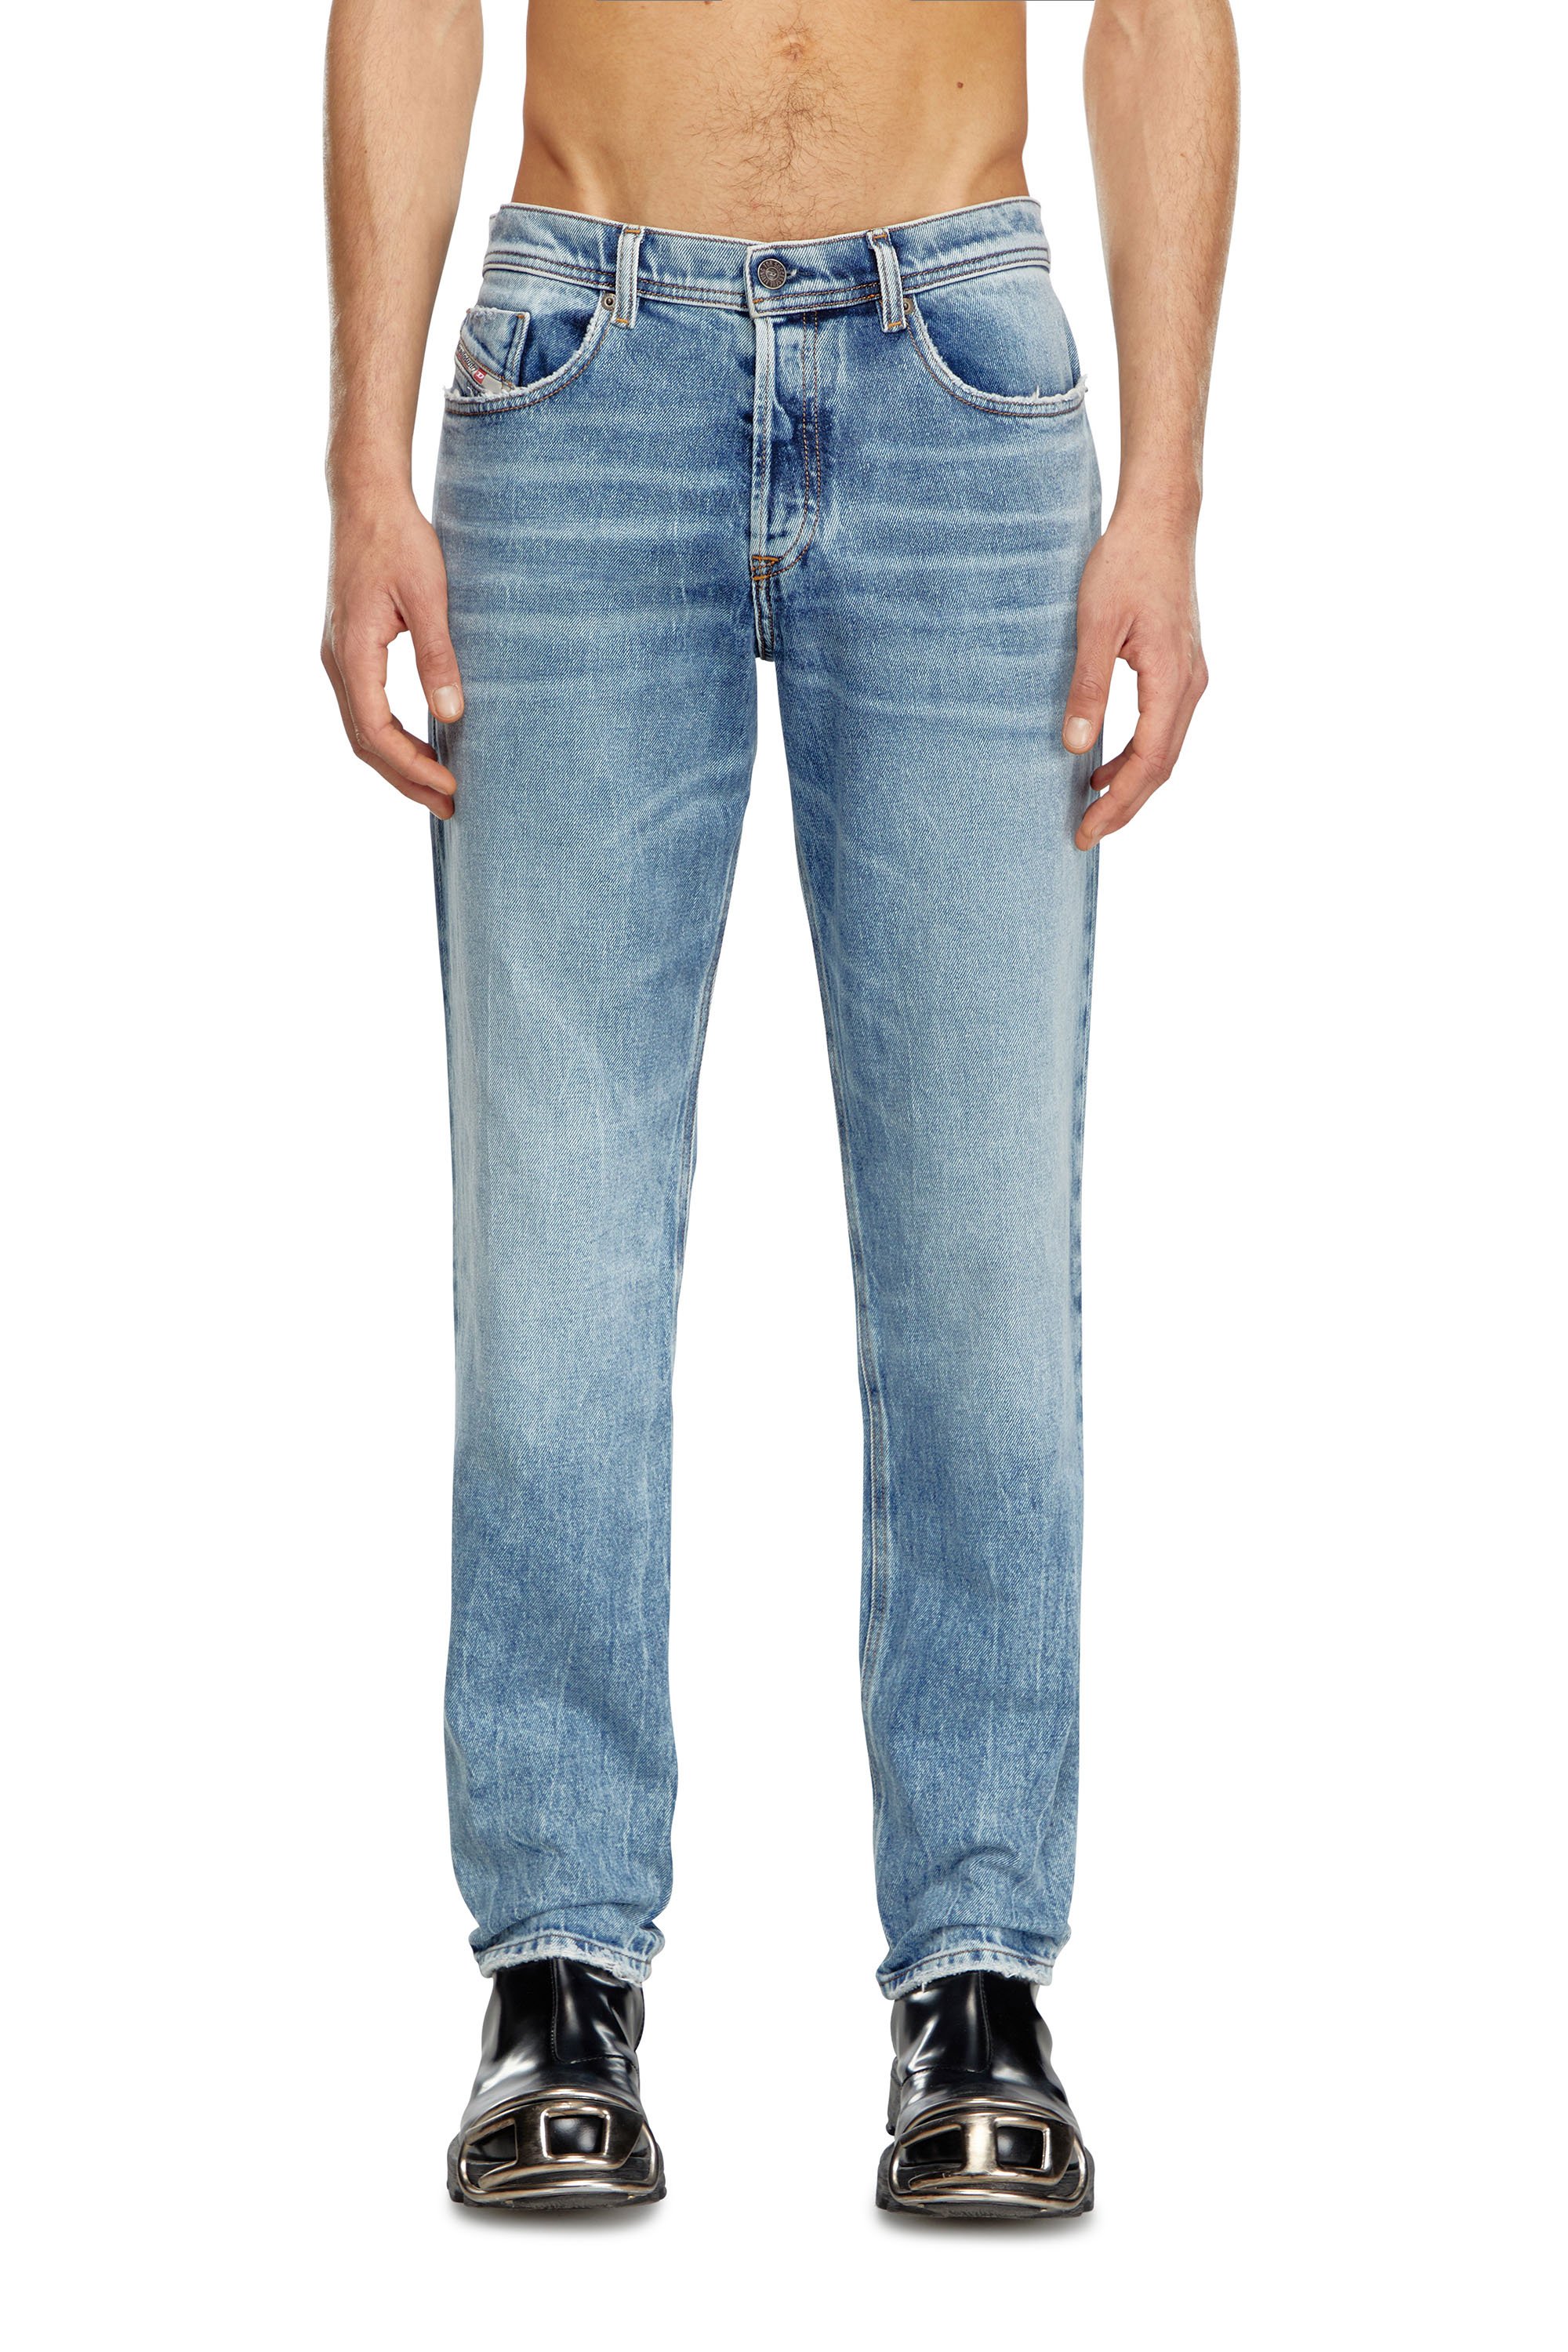 Diesel - Tapered Jeans 2023 D-Finitive 09J54, Hombre Tapered Jeans - 2023 D-Finitive in Azul marino - Image 1